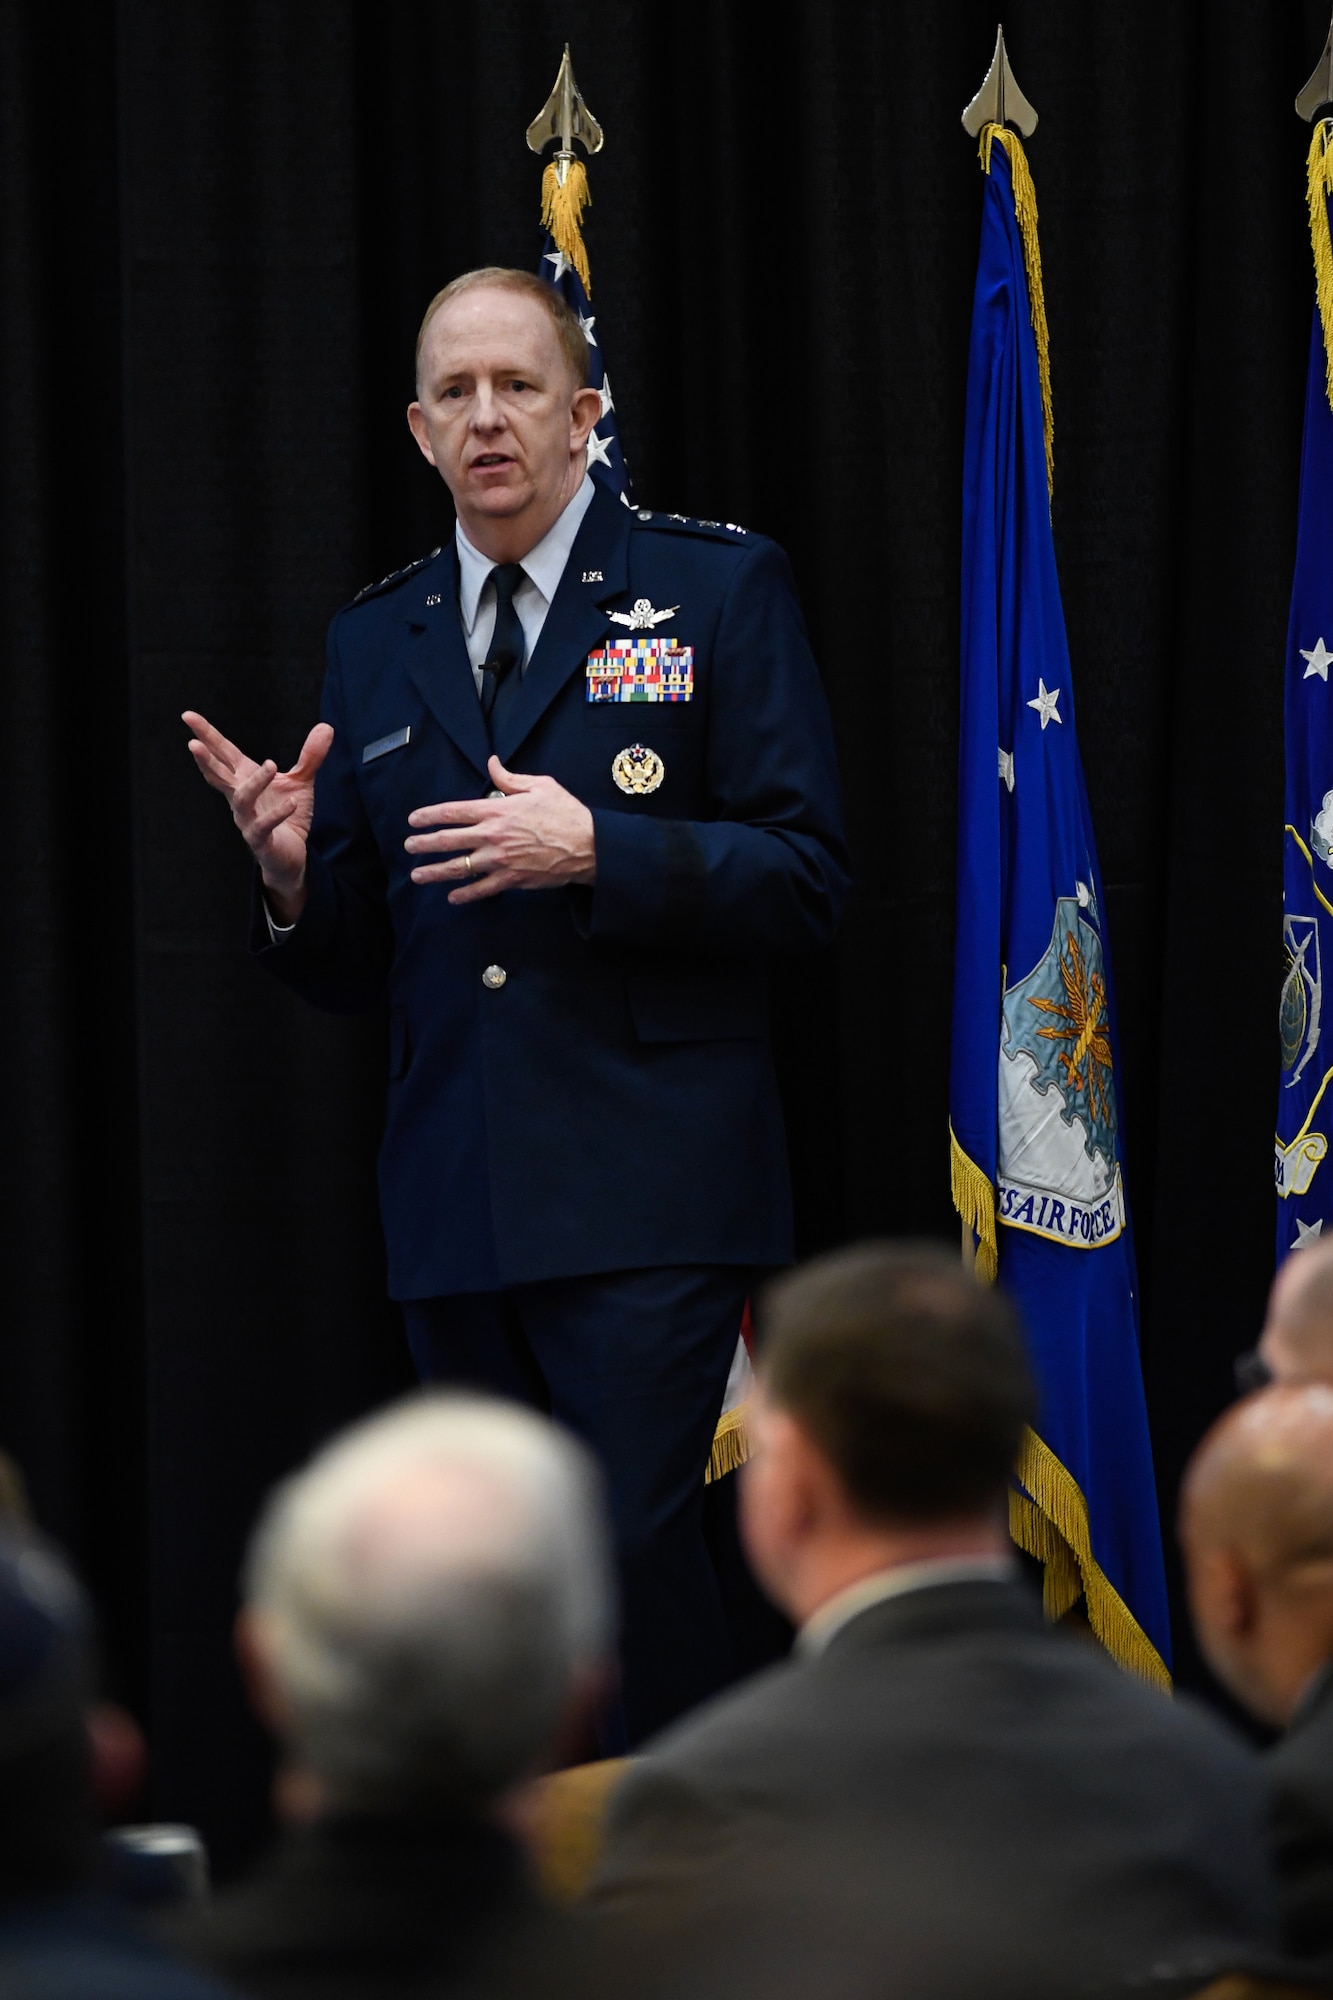 Lt. Gen. Robert D. McMurry, Air Force Life Cycle Management Center commander, delivers a State of LCMC address at a luncheon Jan. 25, 2017.